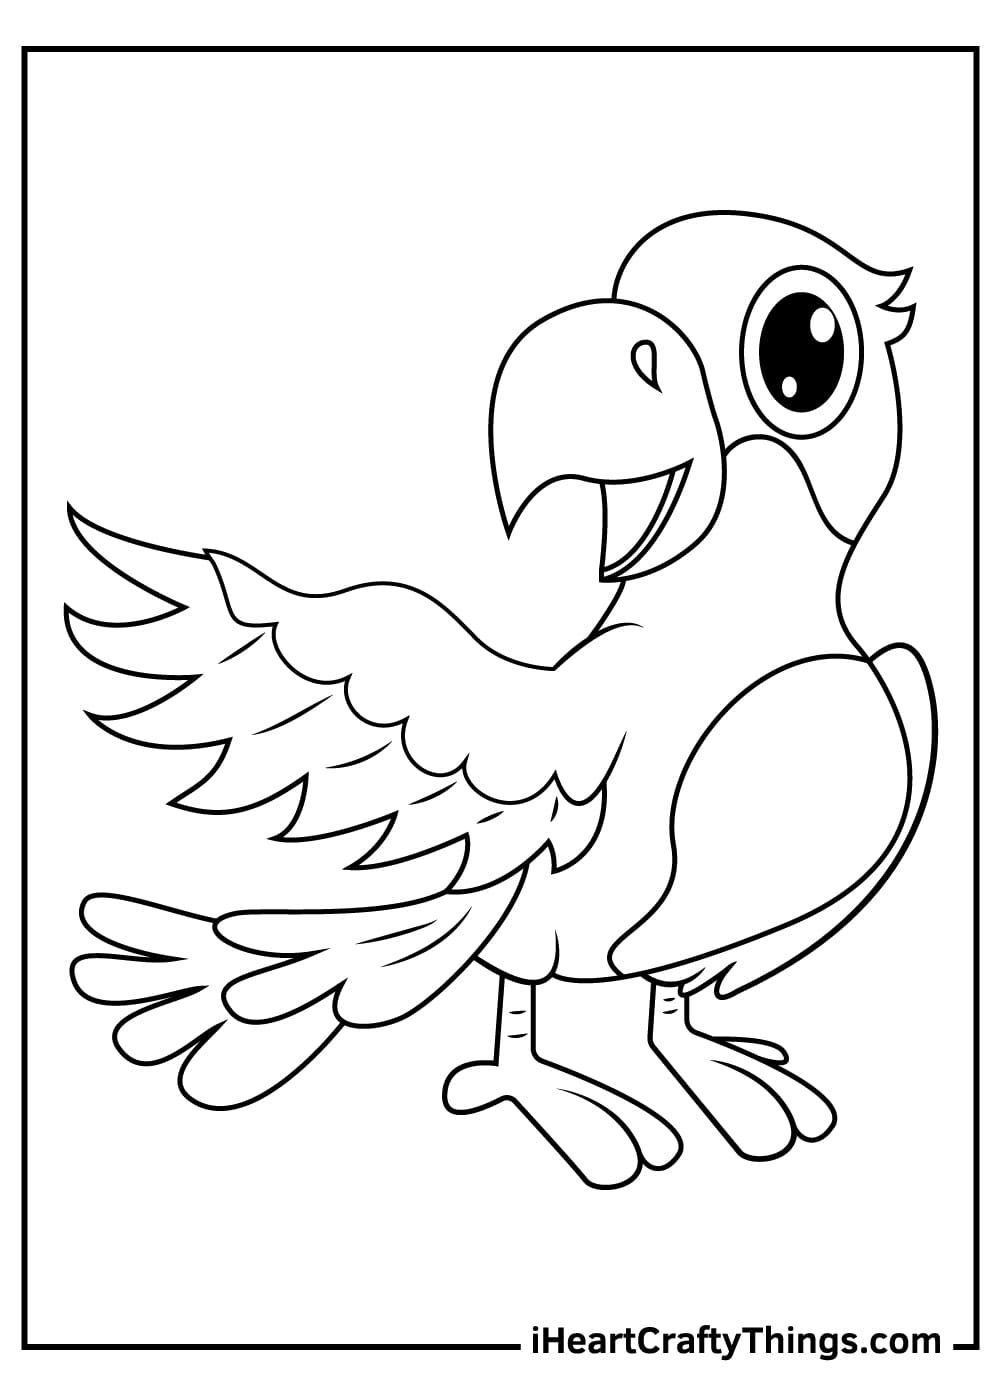 Parrot Good Looking Free Printable Coloring Page